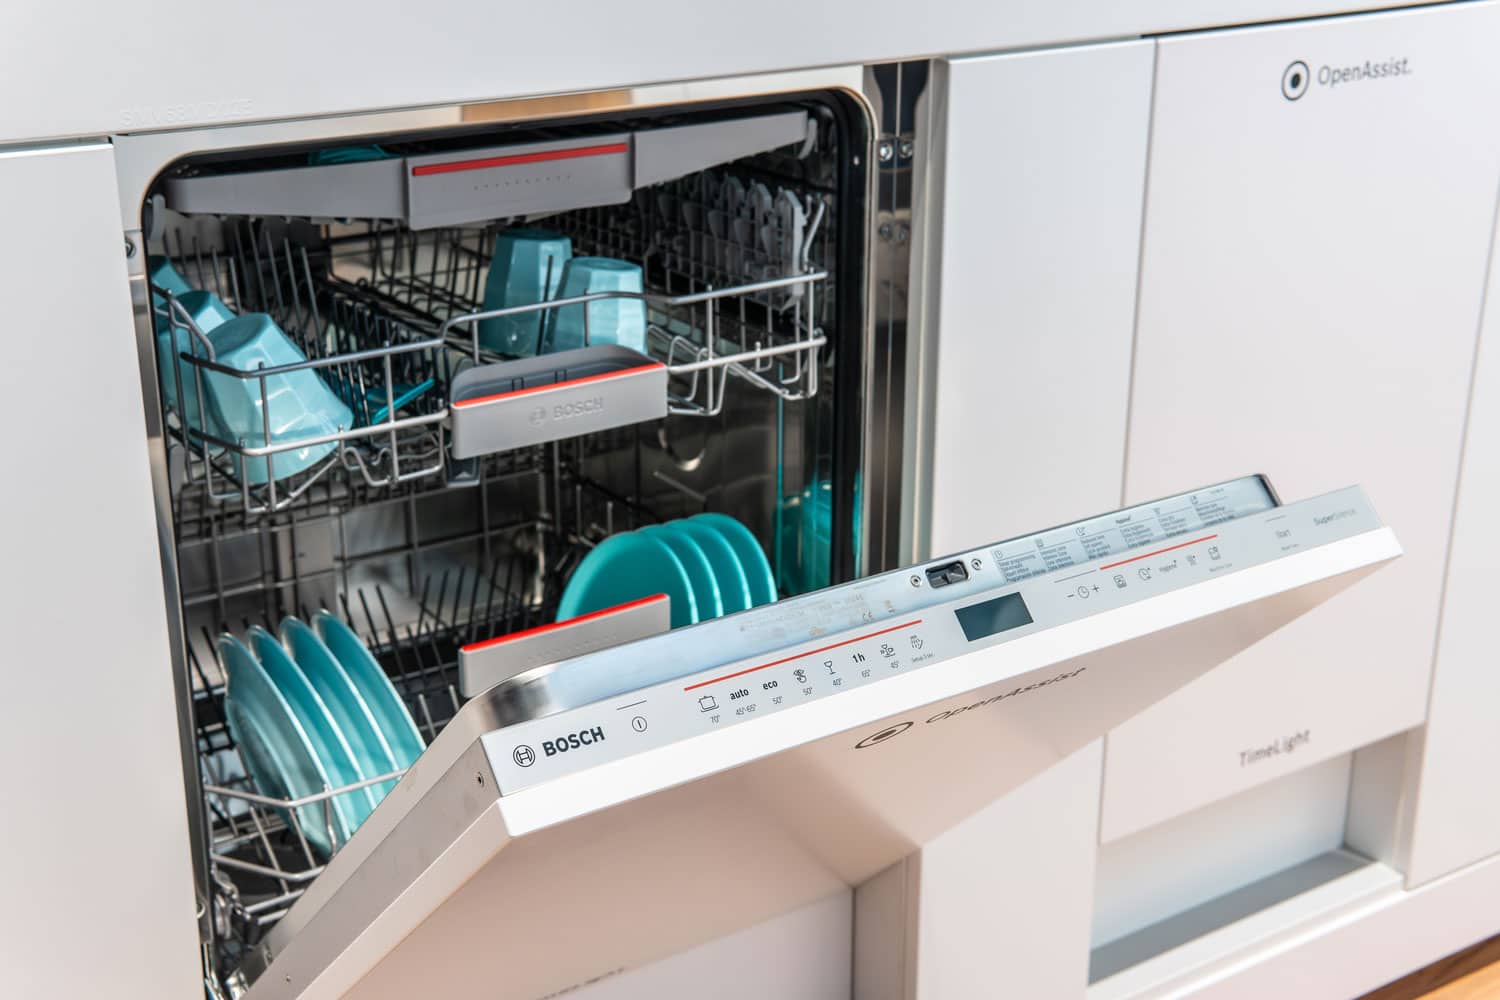 new Built-in Bosch OpenAssist dishwasher on display, at Robert Bosch exhibition pavilion showroom, stand at Global Innovations Show IFA, How To Start A Bosch Dishwasher